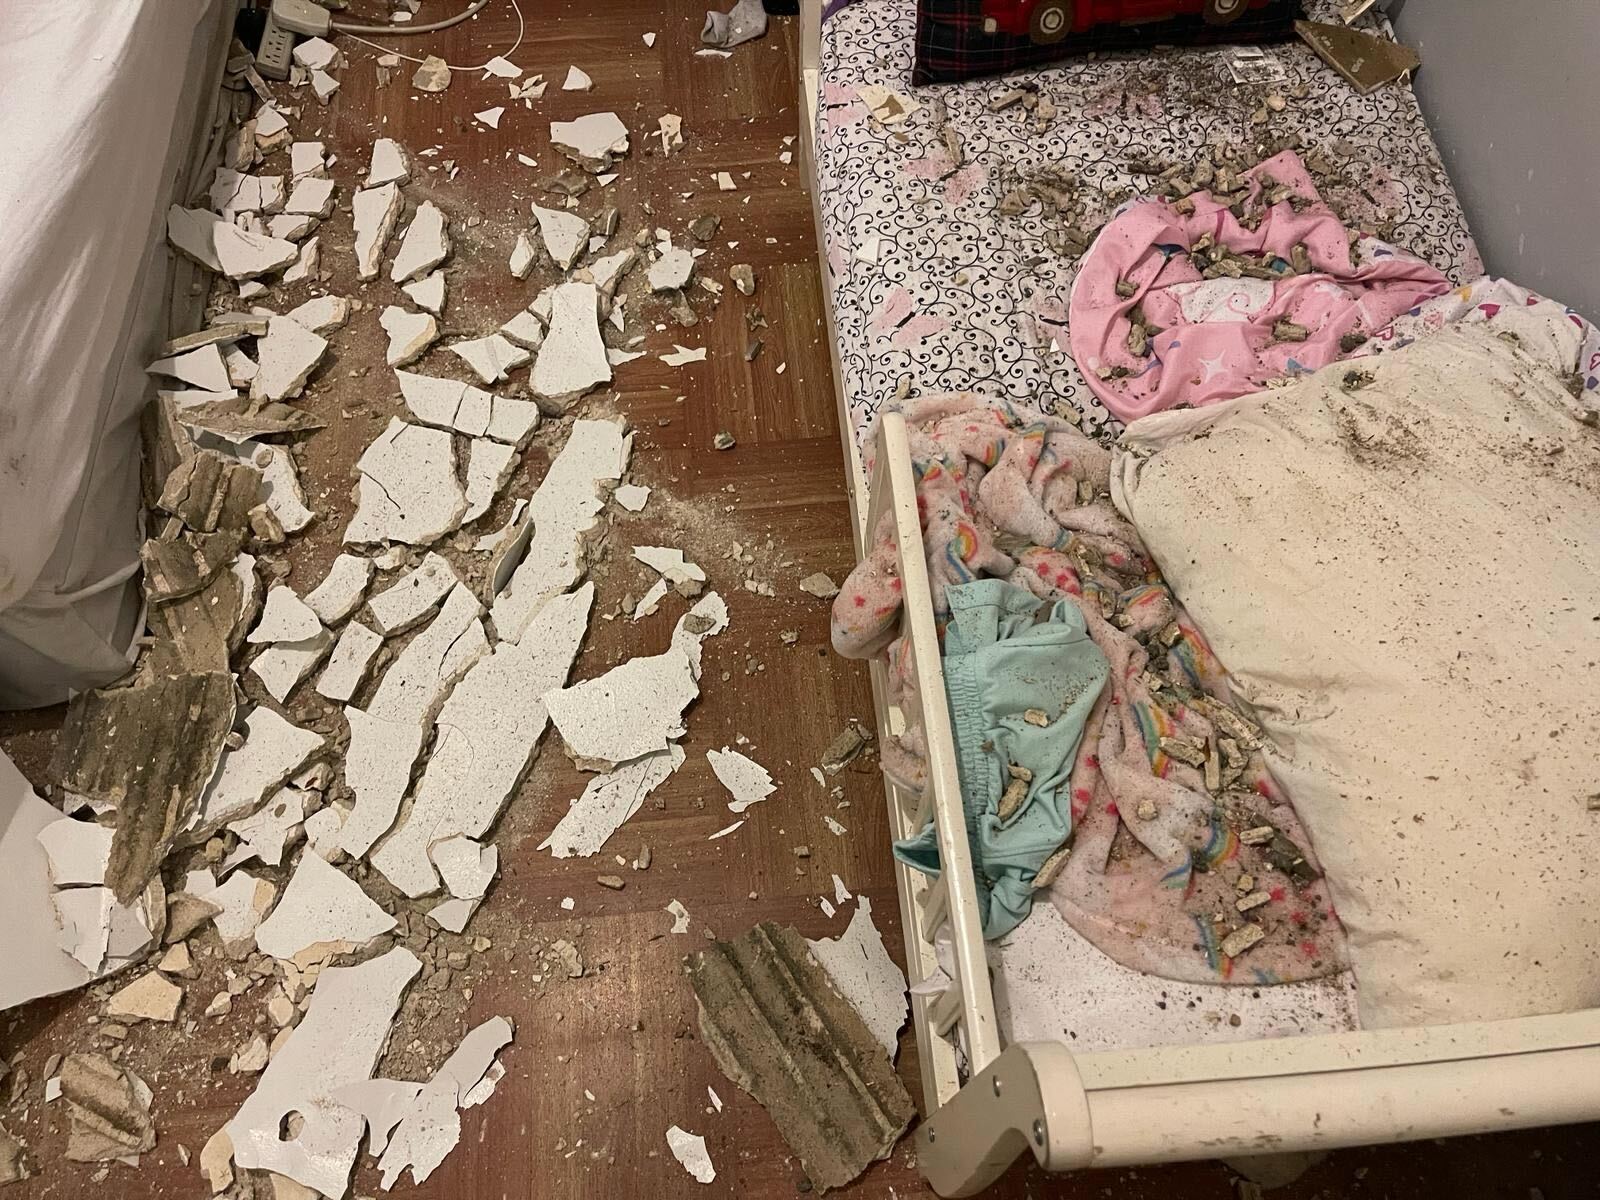 Dry wall and other material from a collapsed ceiling fell onto a child's bed.